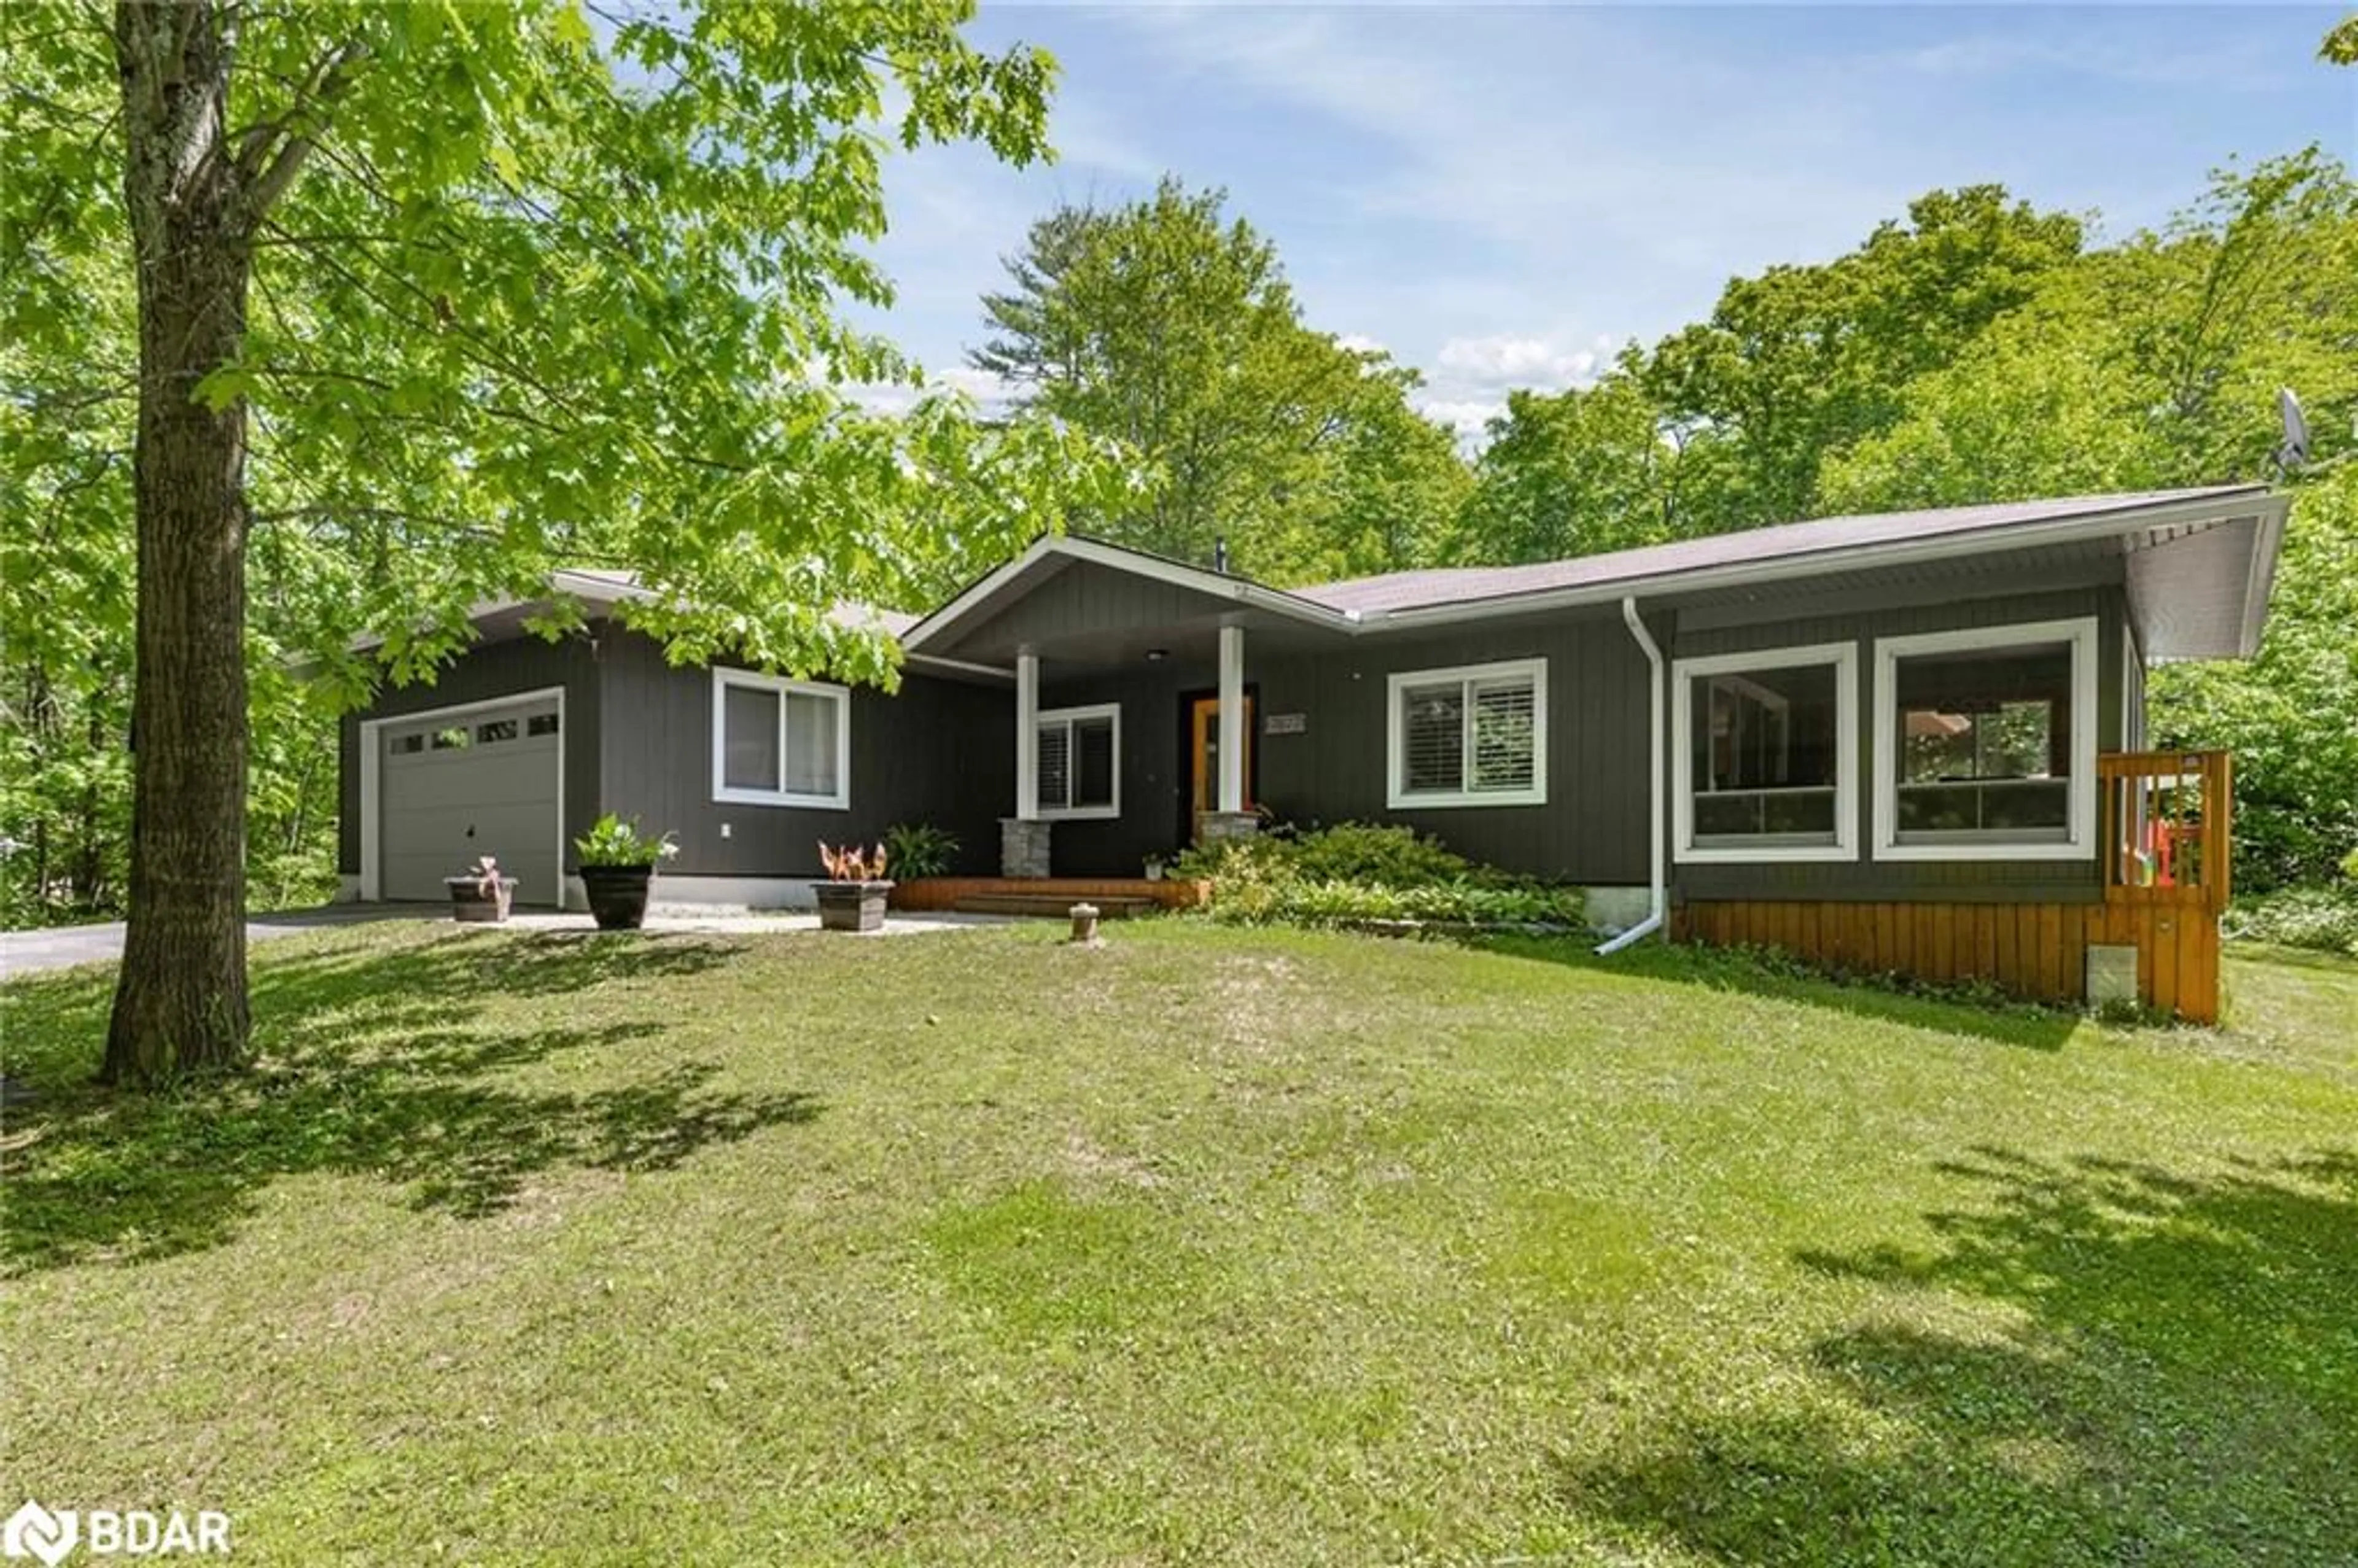 Home with vinyl exterior material for 7877 Pineridge Rd, Washago Ontario L0K 2B0